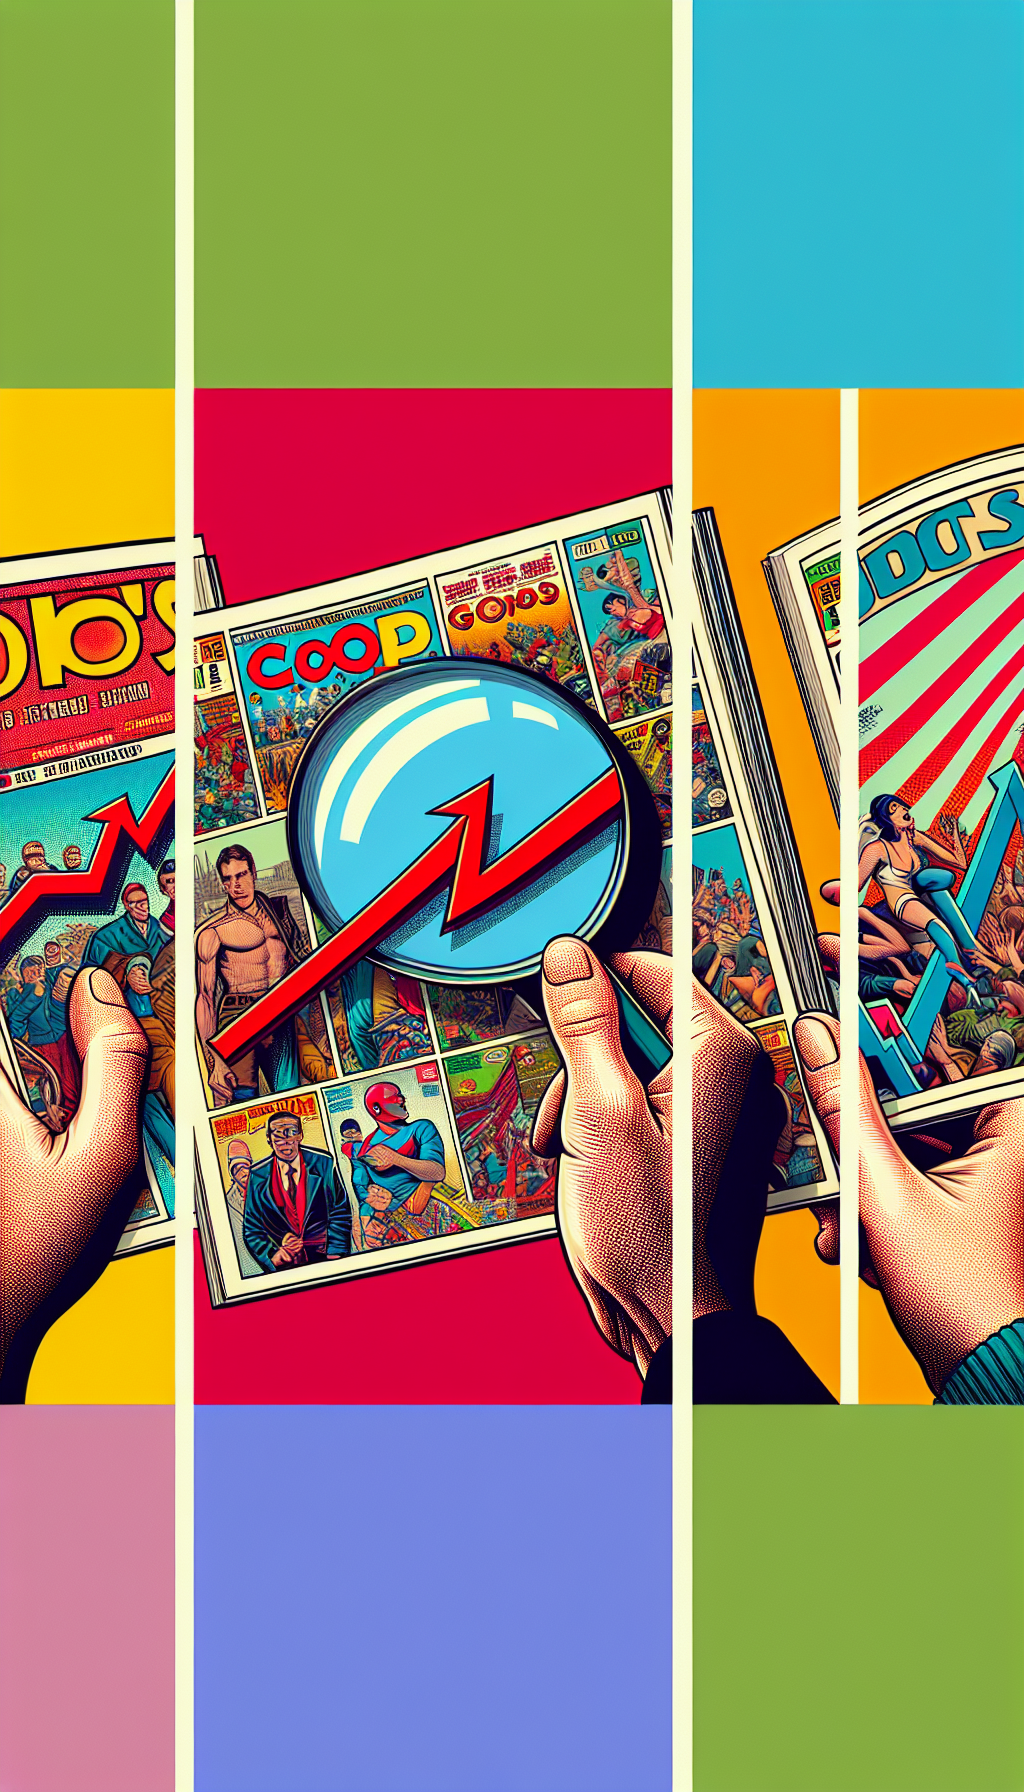 An illustration, split into a triptych, displaying a magnifying glass held over a classic Playboy cover in the first panel, with the middle showcasing a soaring graph labeled "Value Over Time," and the third featuring collectors exchanging covers, framed in different artistic styles: the first in photorealism, the second in pop art, and the third in a vintage comic book style.